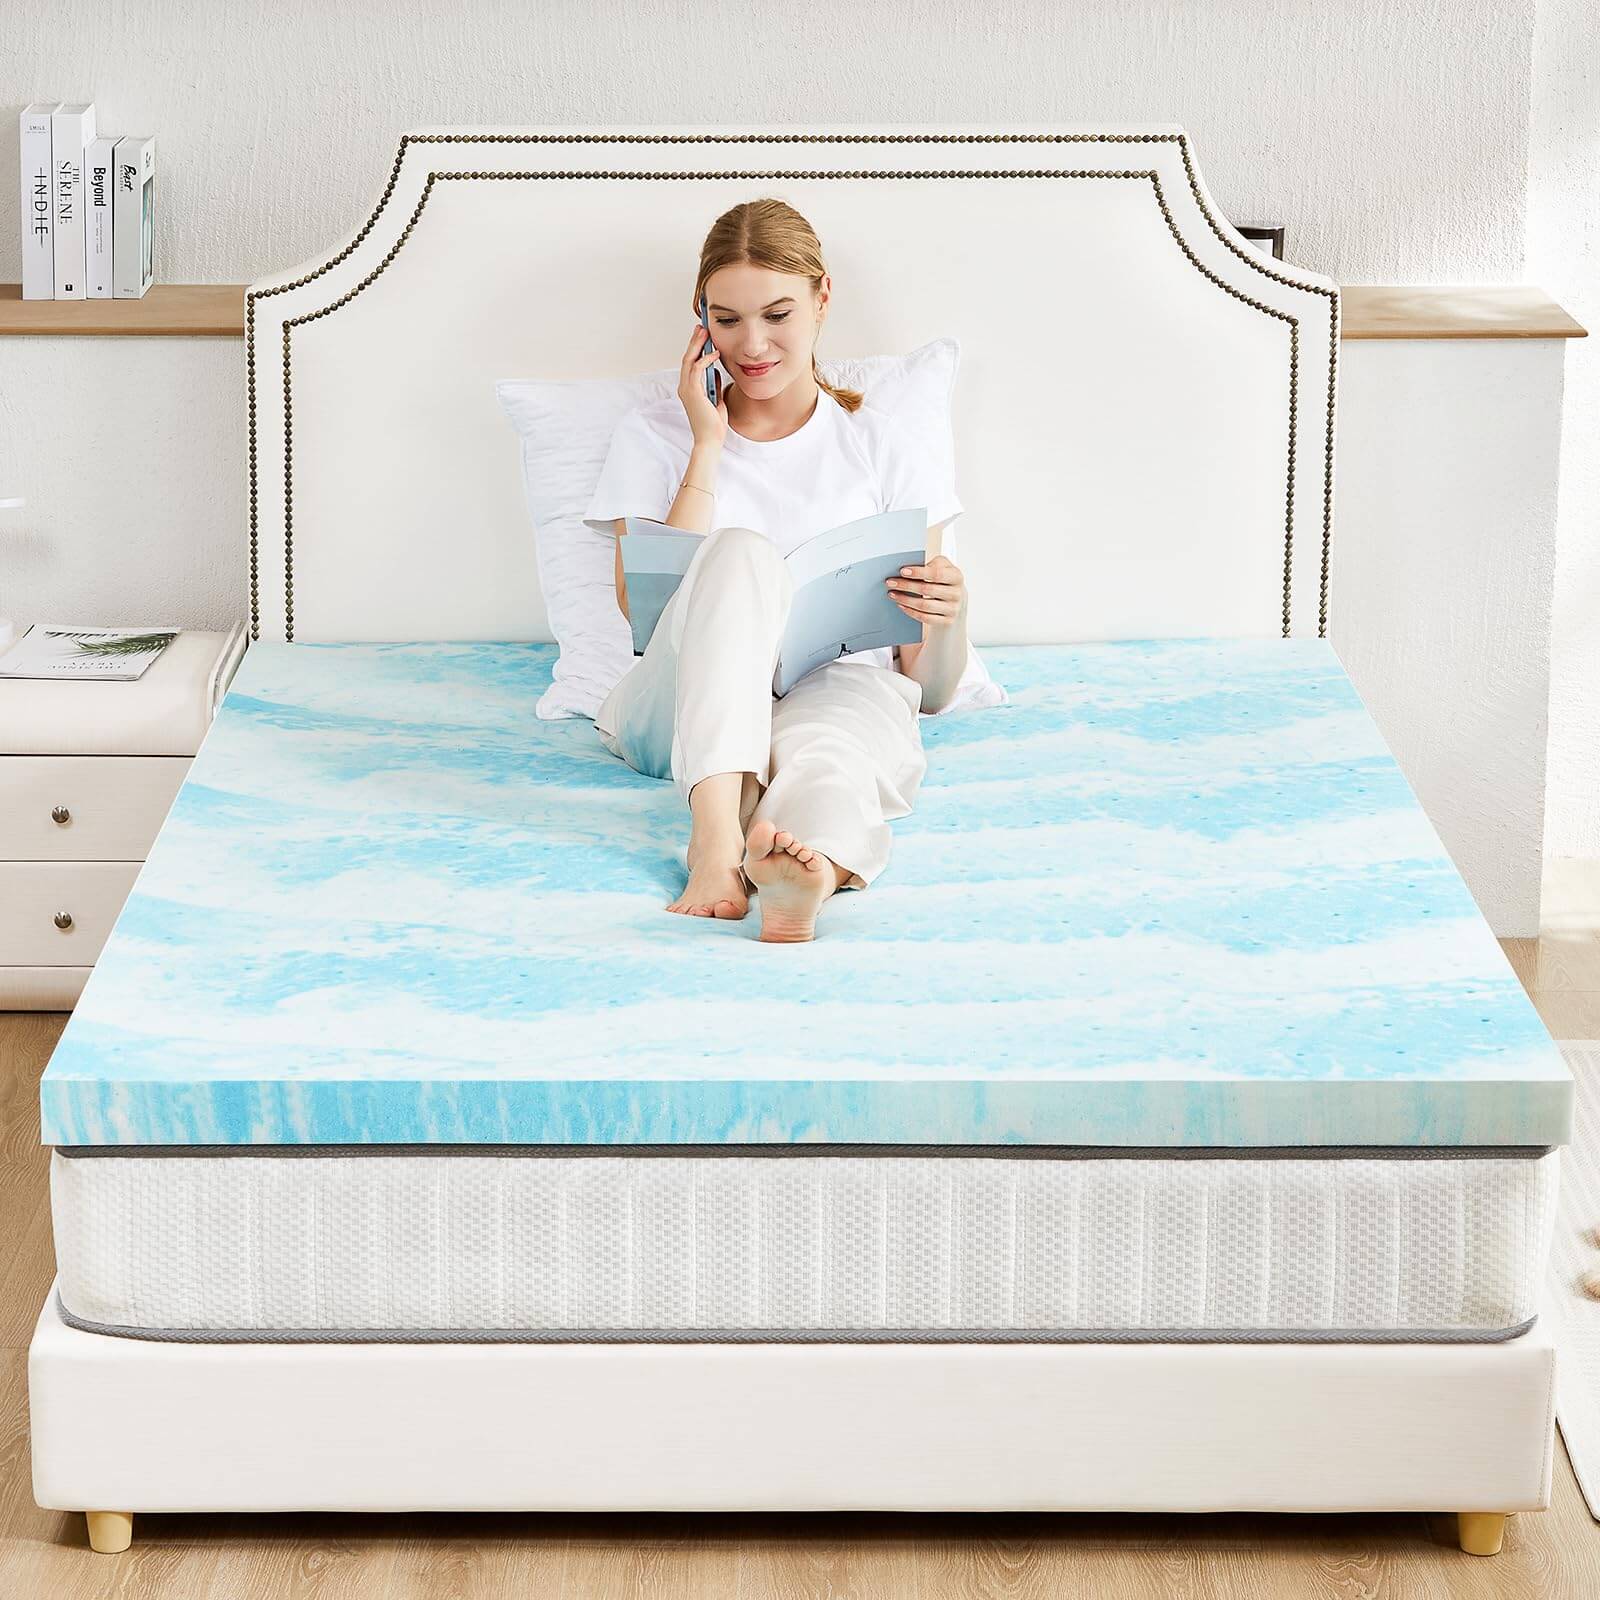 memory-foam-bed-topper#Style_3 Inches#Size_Queen